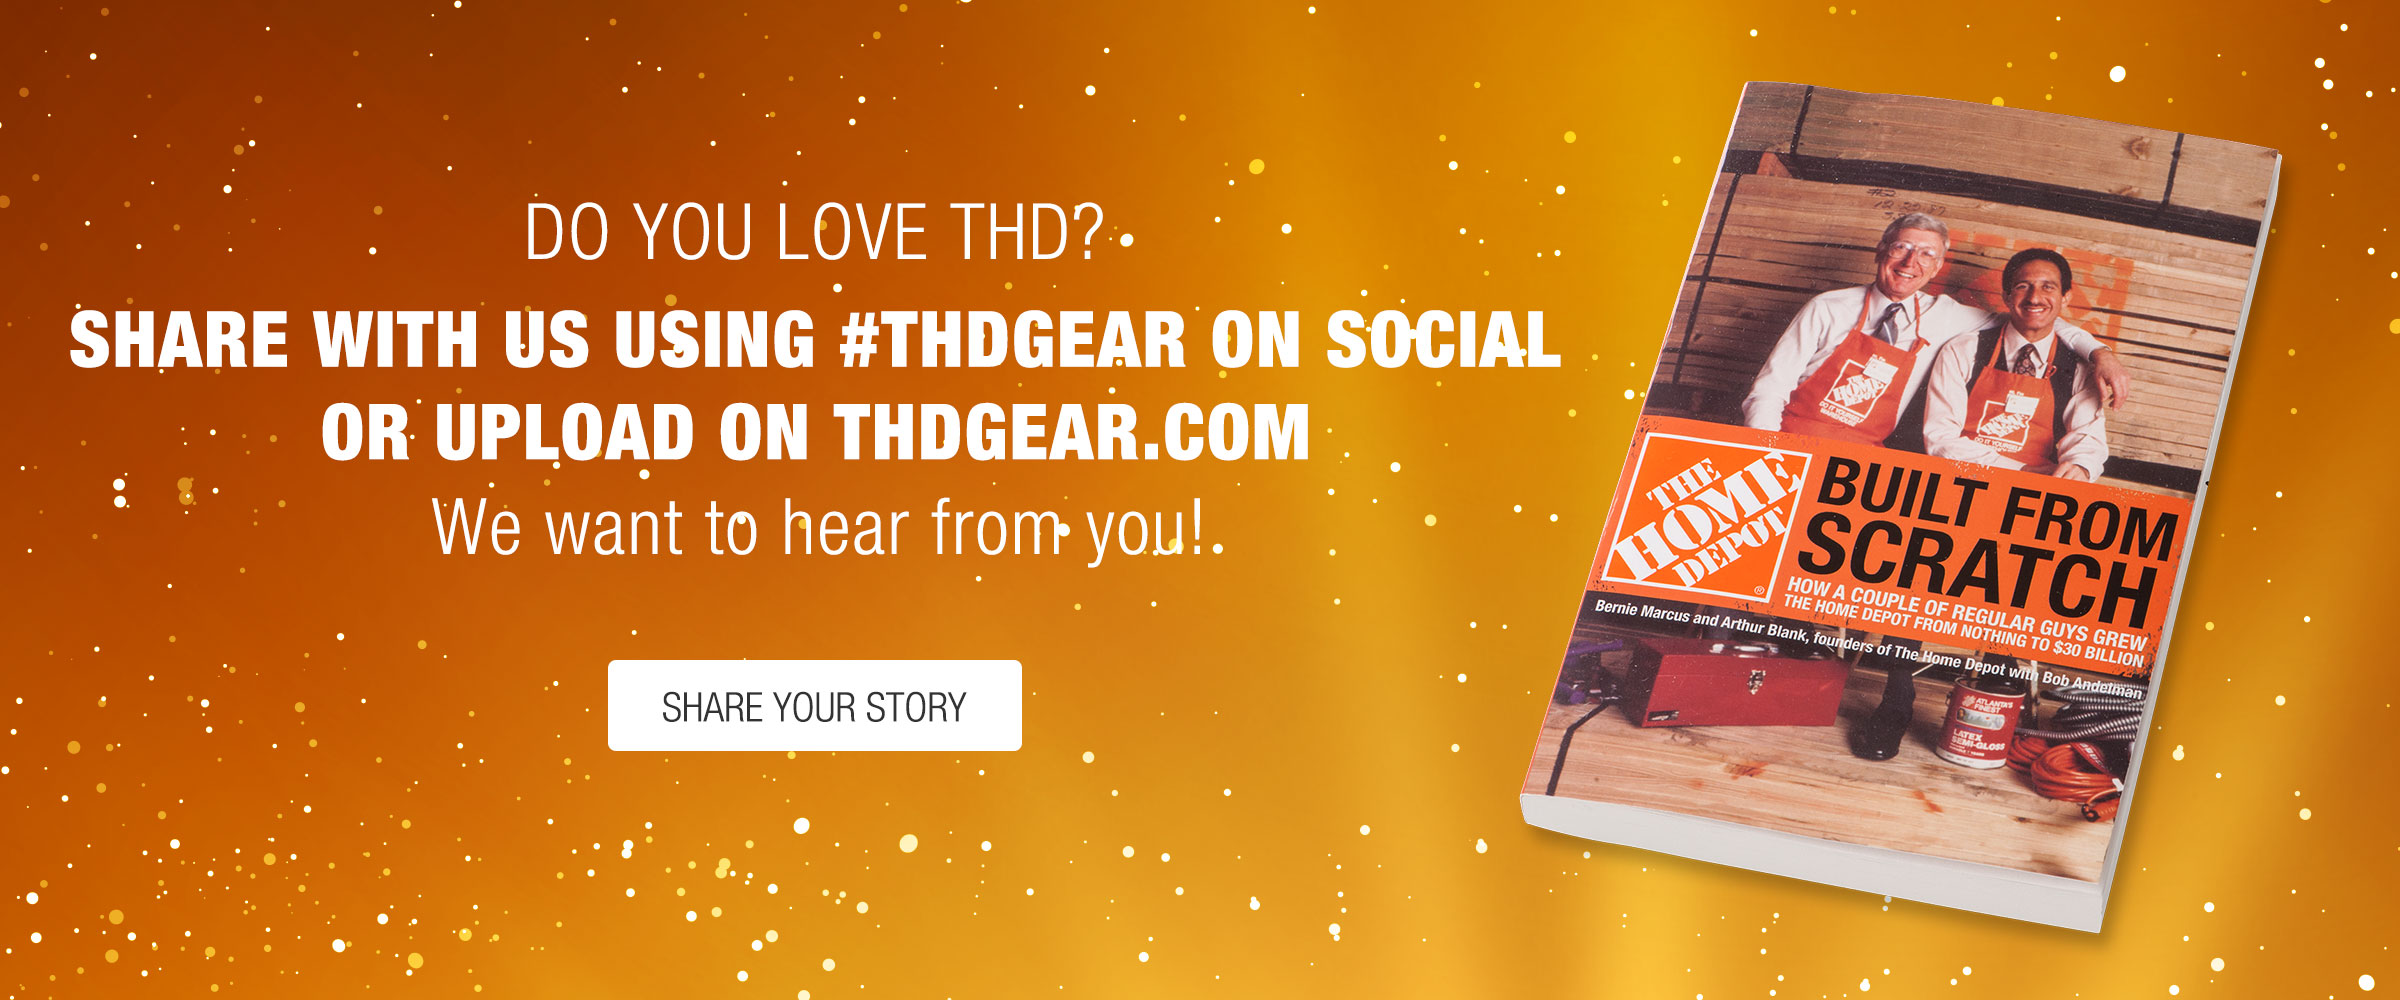 share your story with thdgear on social media hashtag thdgear